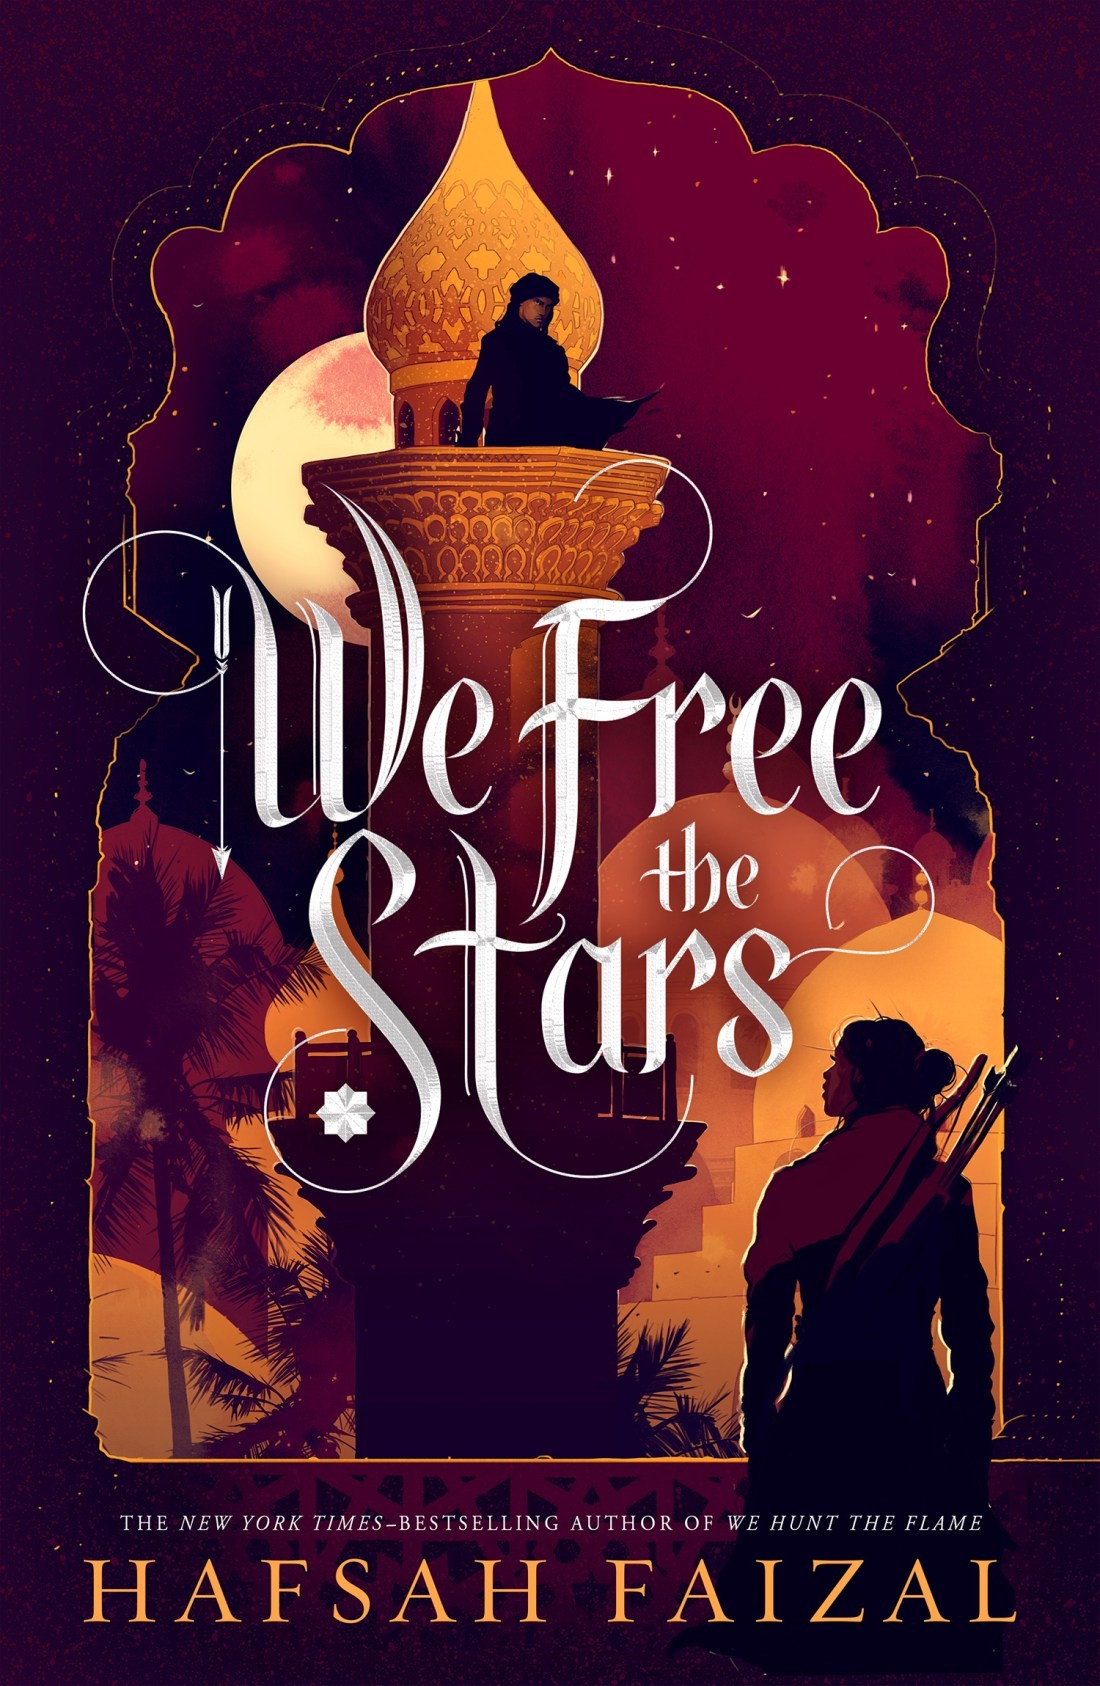 Book cover: We Free the Stars by Hafsah Faizal